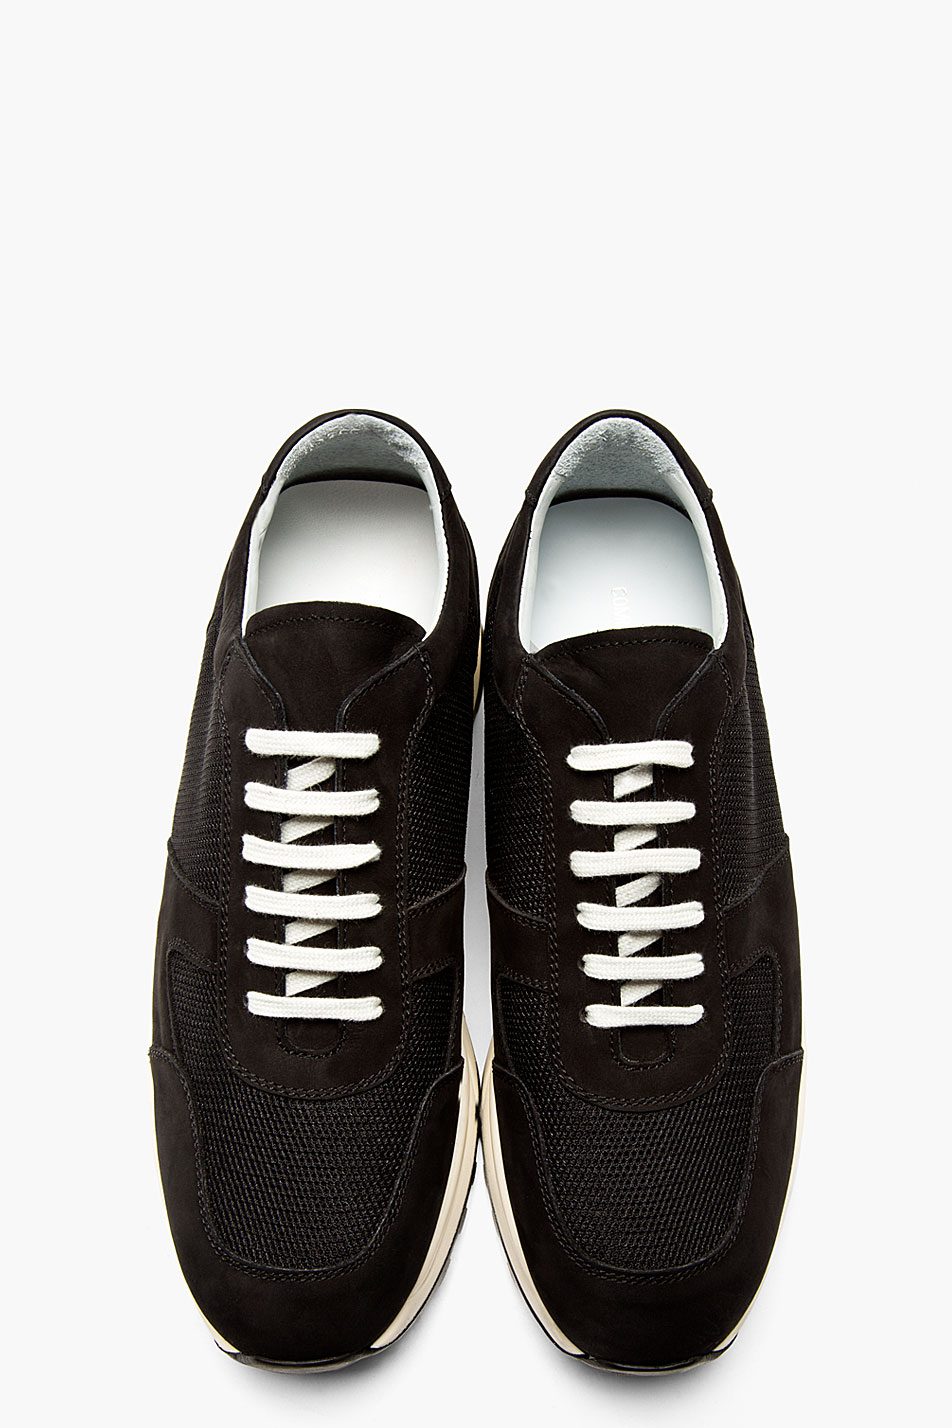 Common Projects Black Track Running Shoes for Men - Lyst